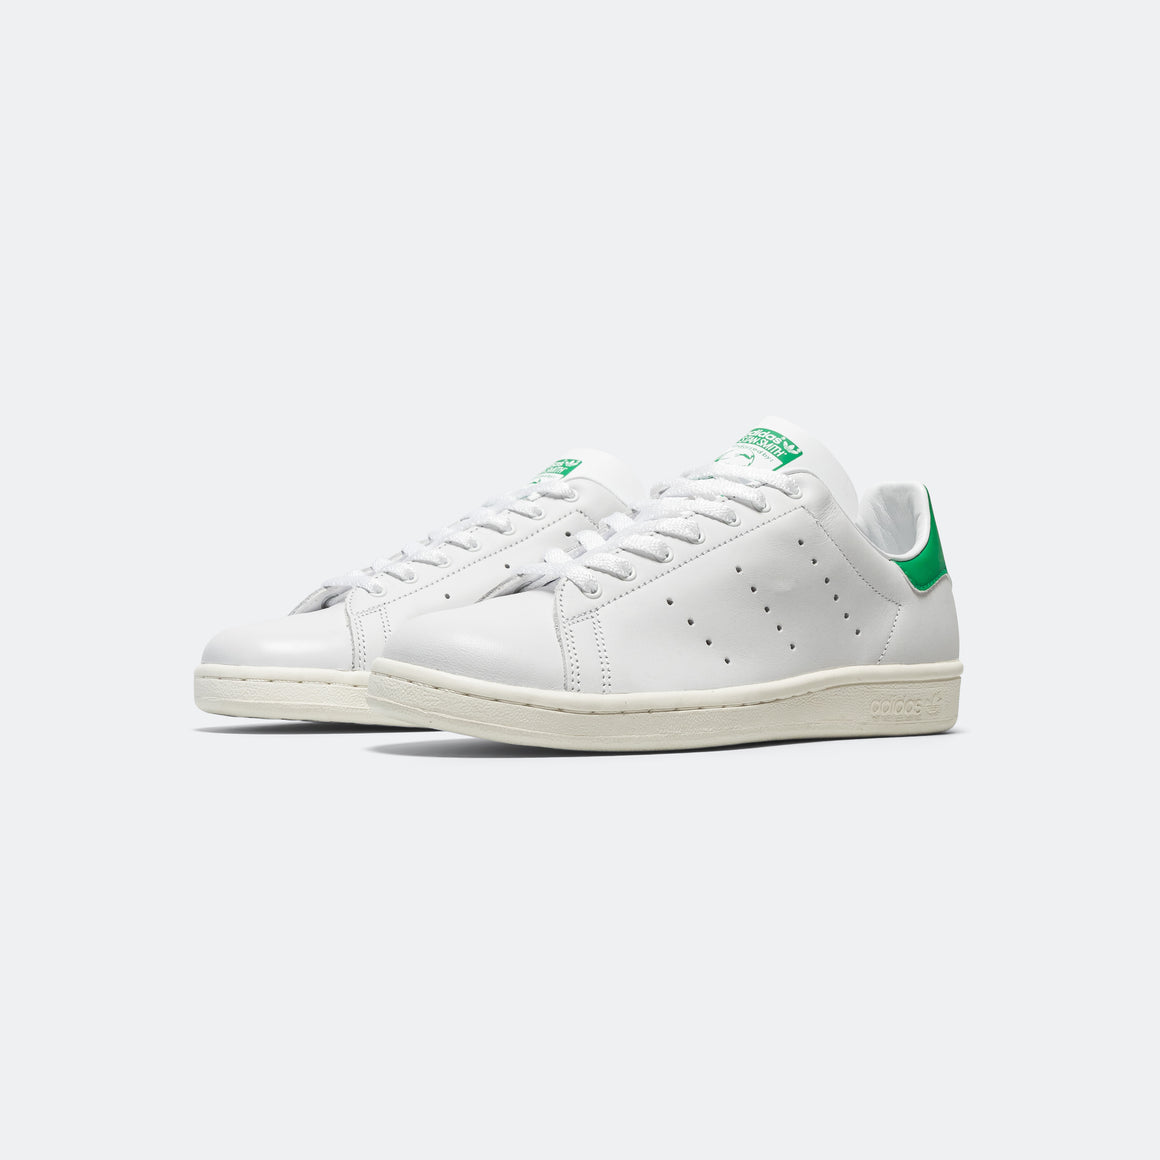 adidas - Stan Smith 80s - Footwear White/Green - UP THERE